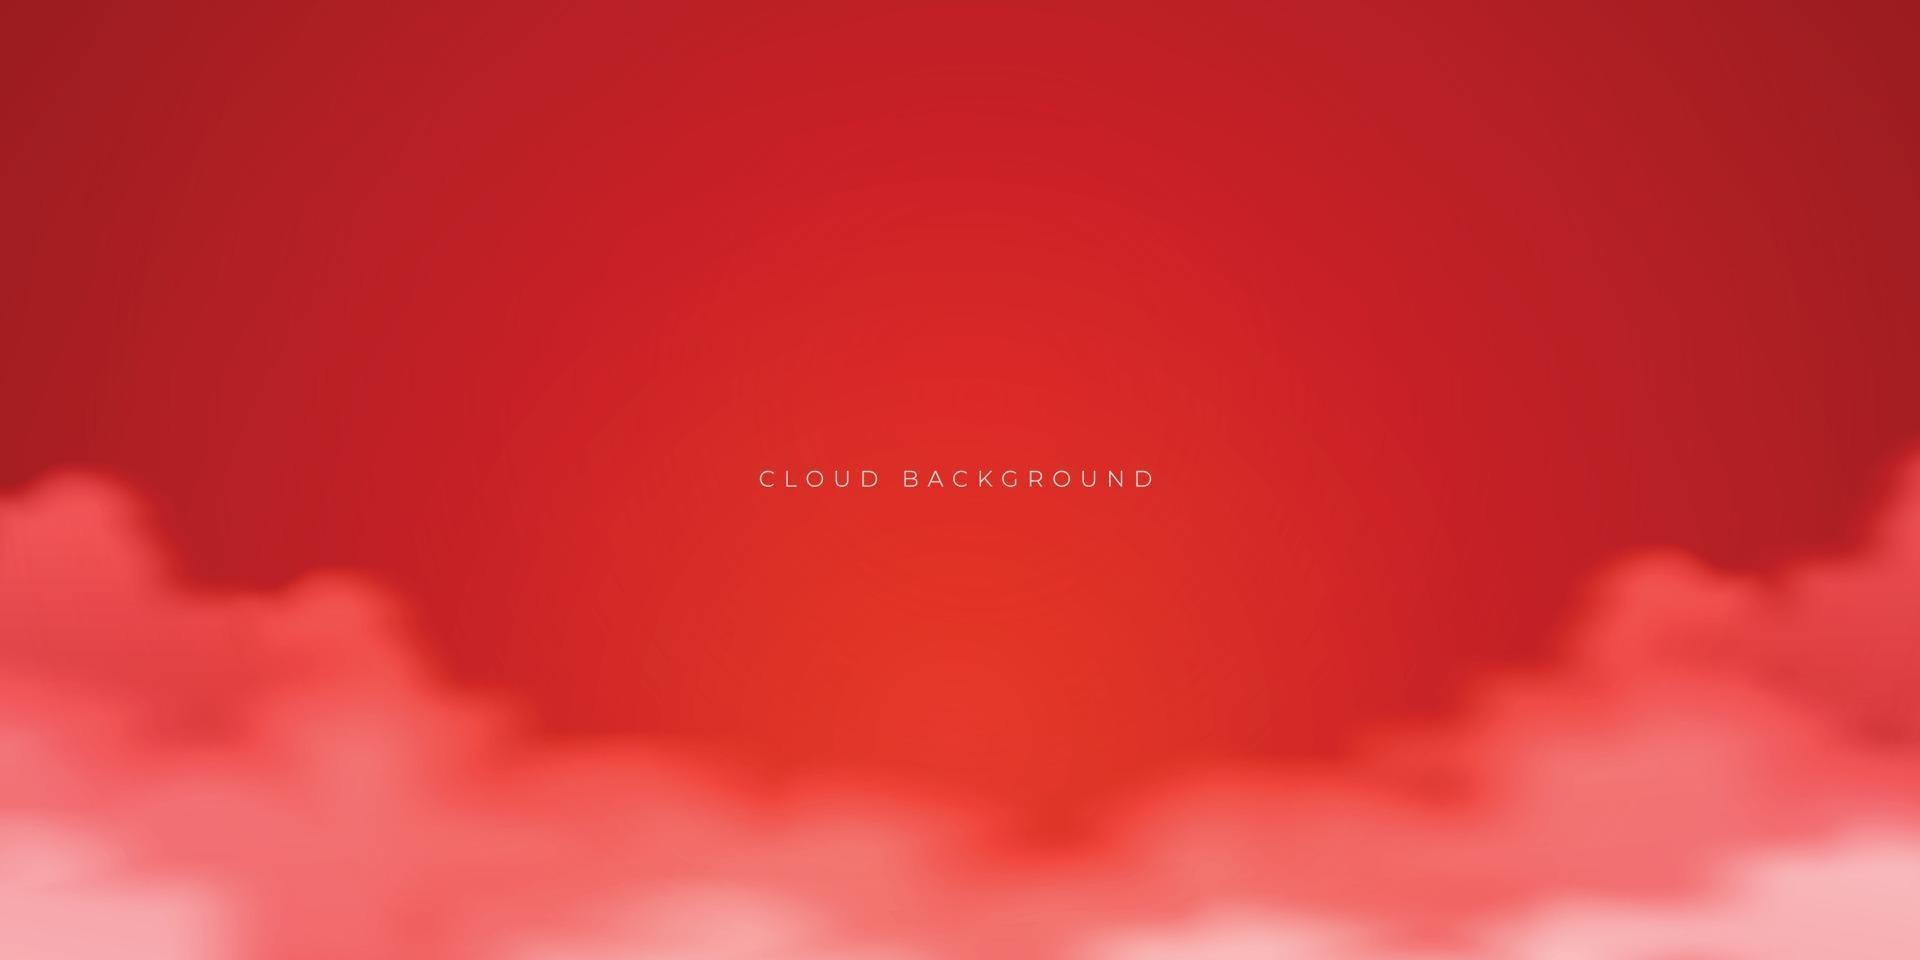 lovely red cloud background design template vector